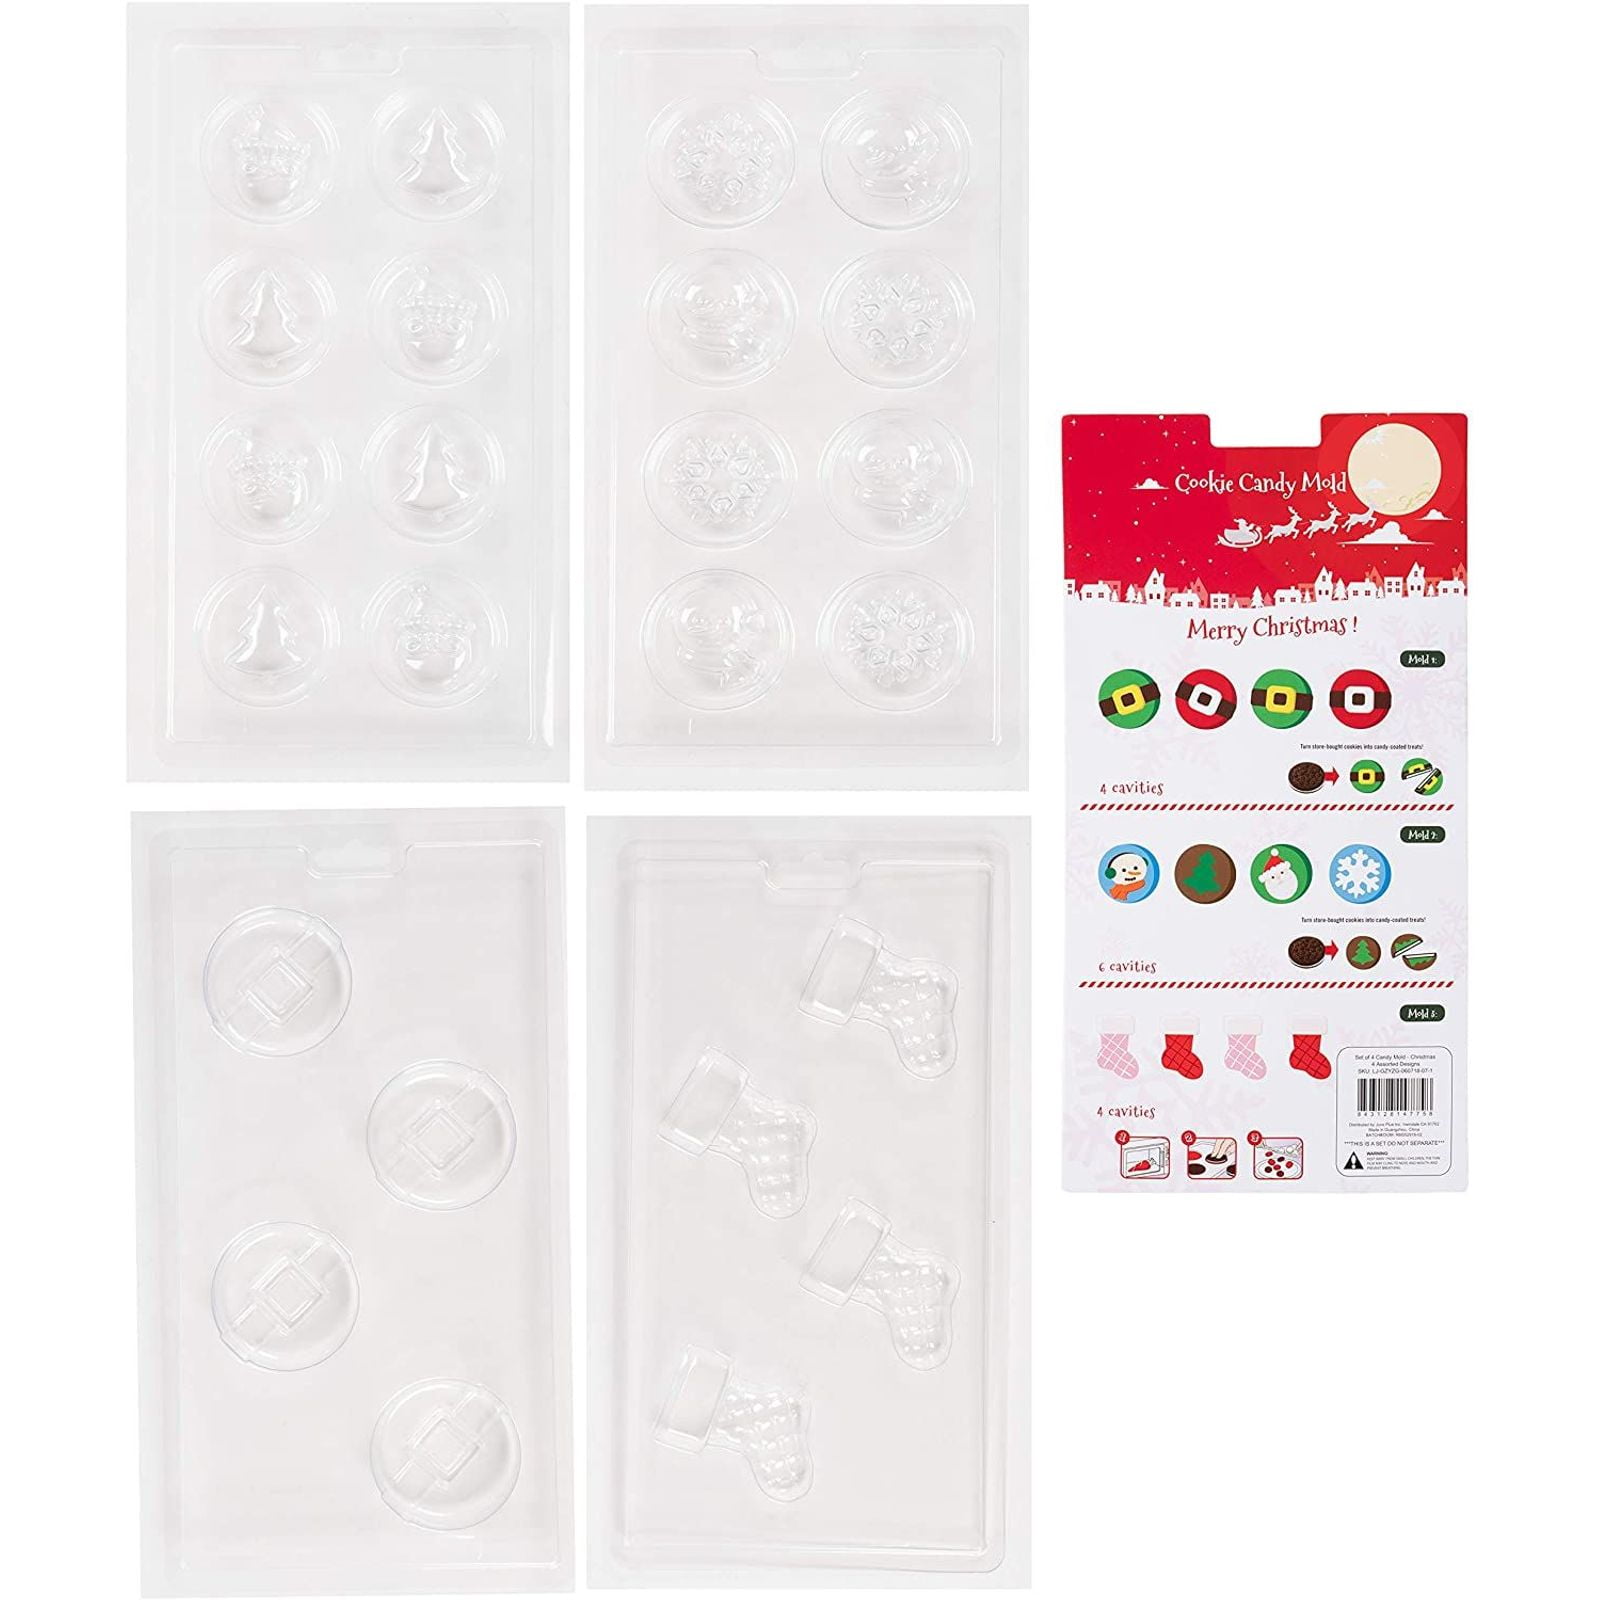 4 designs 16 SMALL ASSORTED ROUND CHRISTMAS SHAPES CHOCOLATE MOULD 